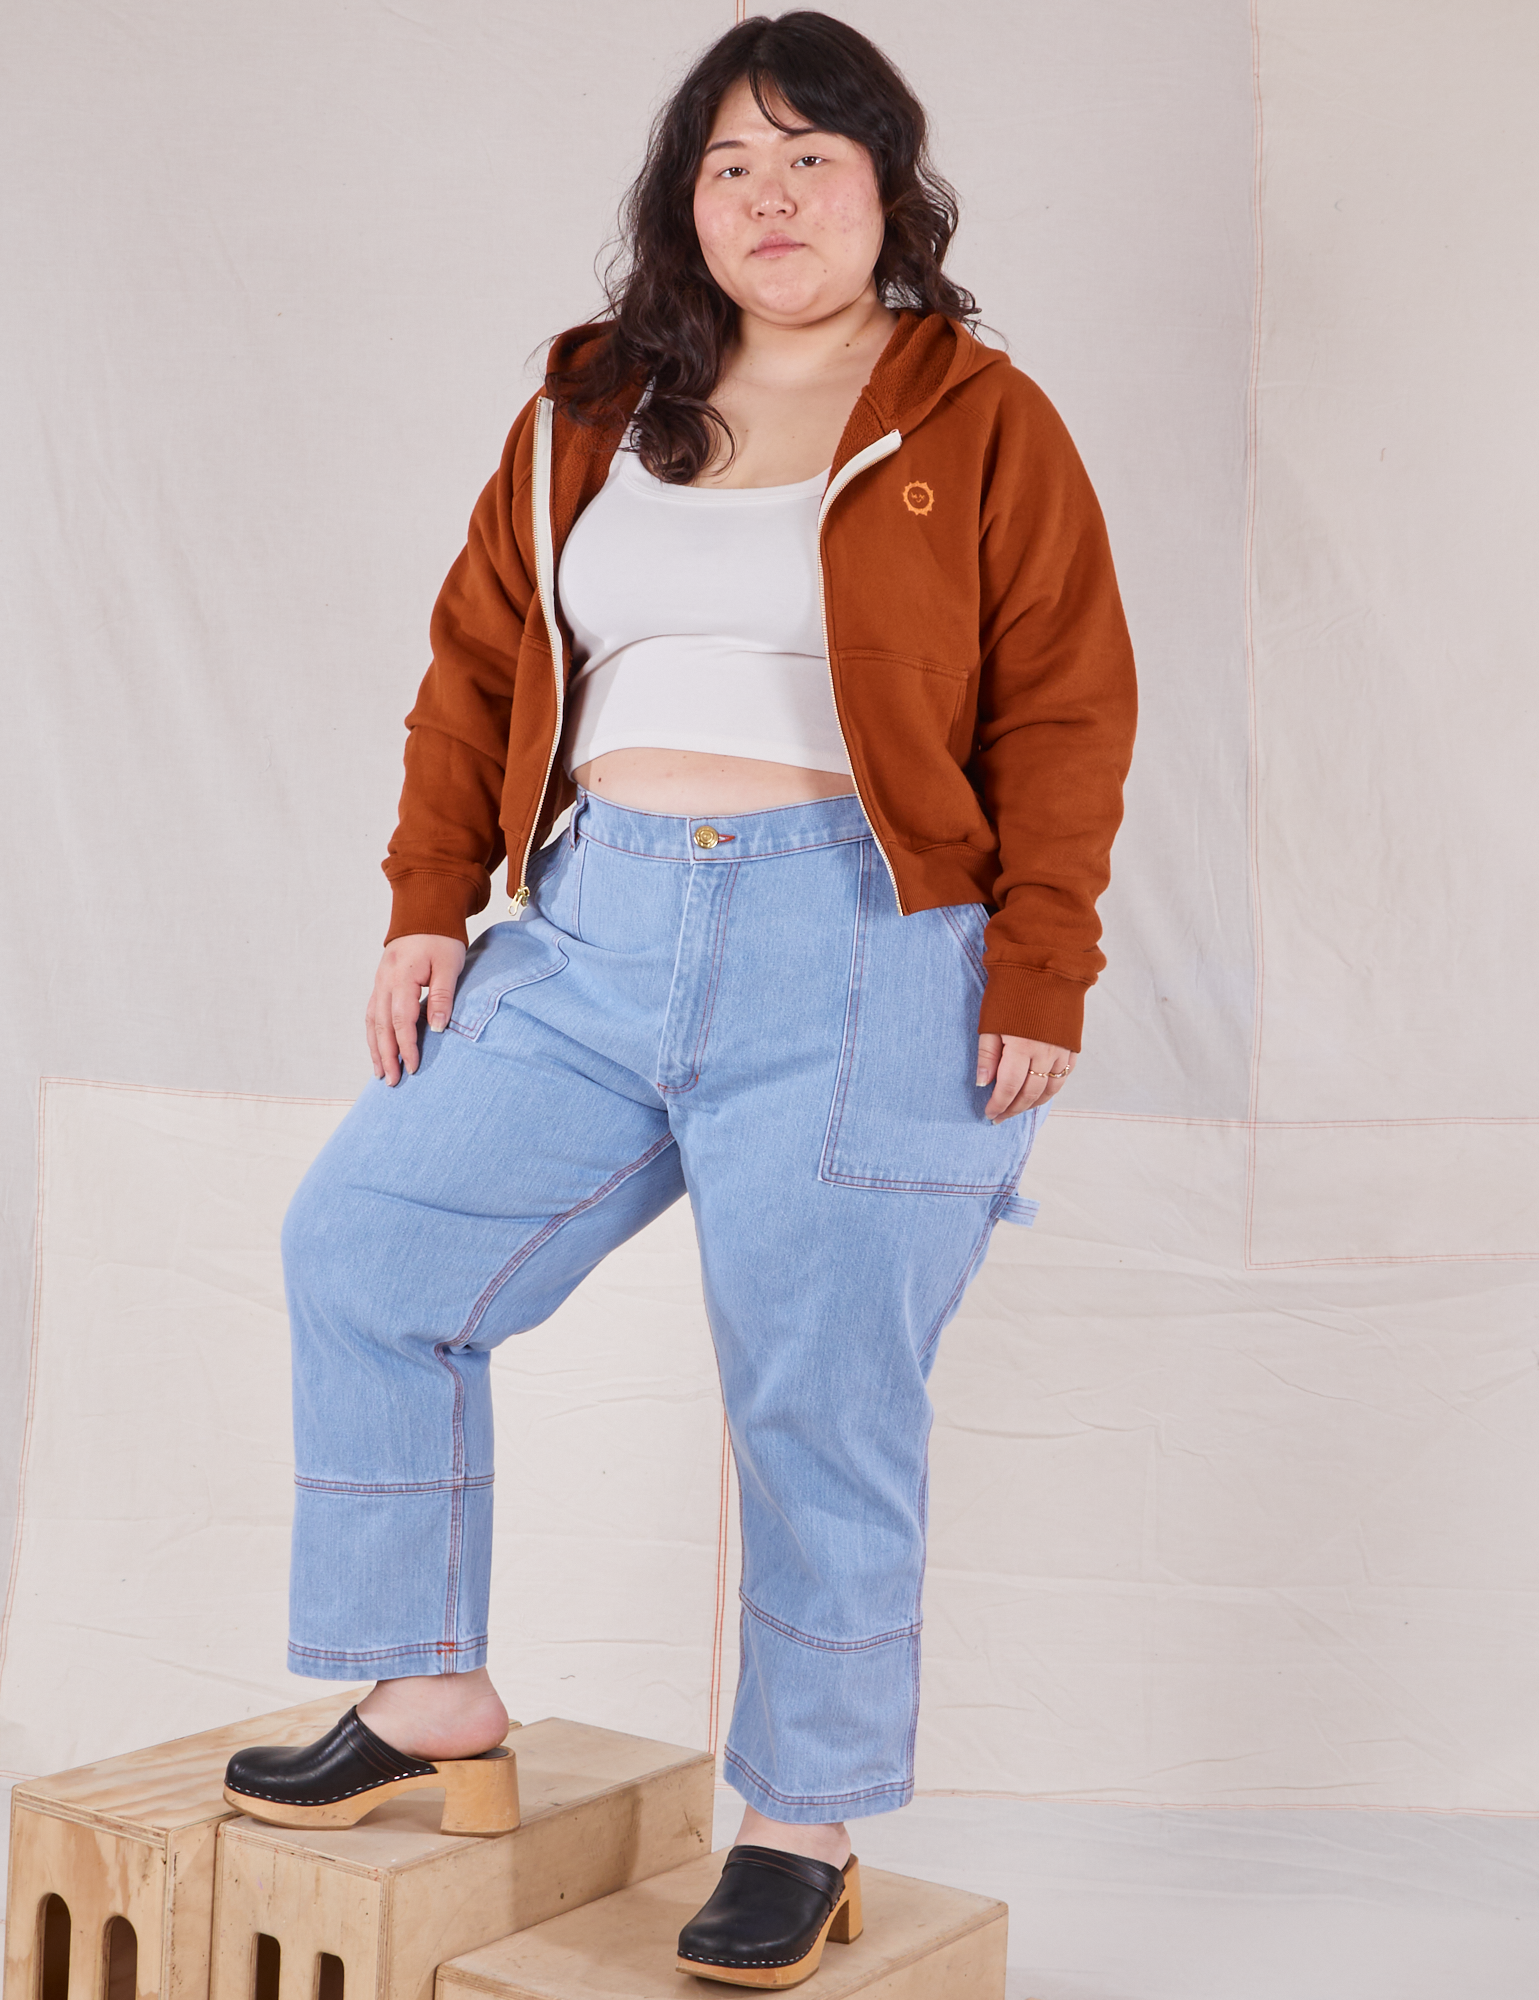 Ashley is 5&#39;7&quot; and wearing L Cropped Zip Hoodie in Burnt Terracotta paired with a vintage off-white Cropped Tank and light wash Carpenter Jeans